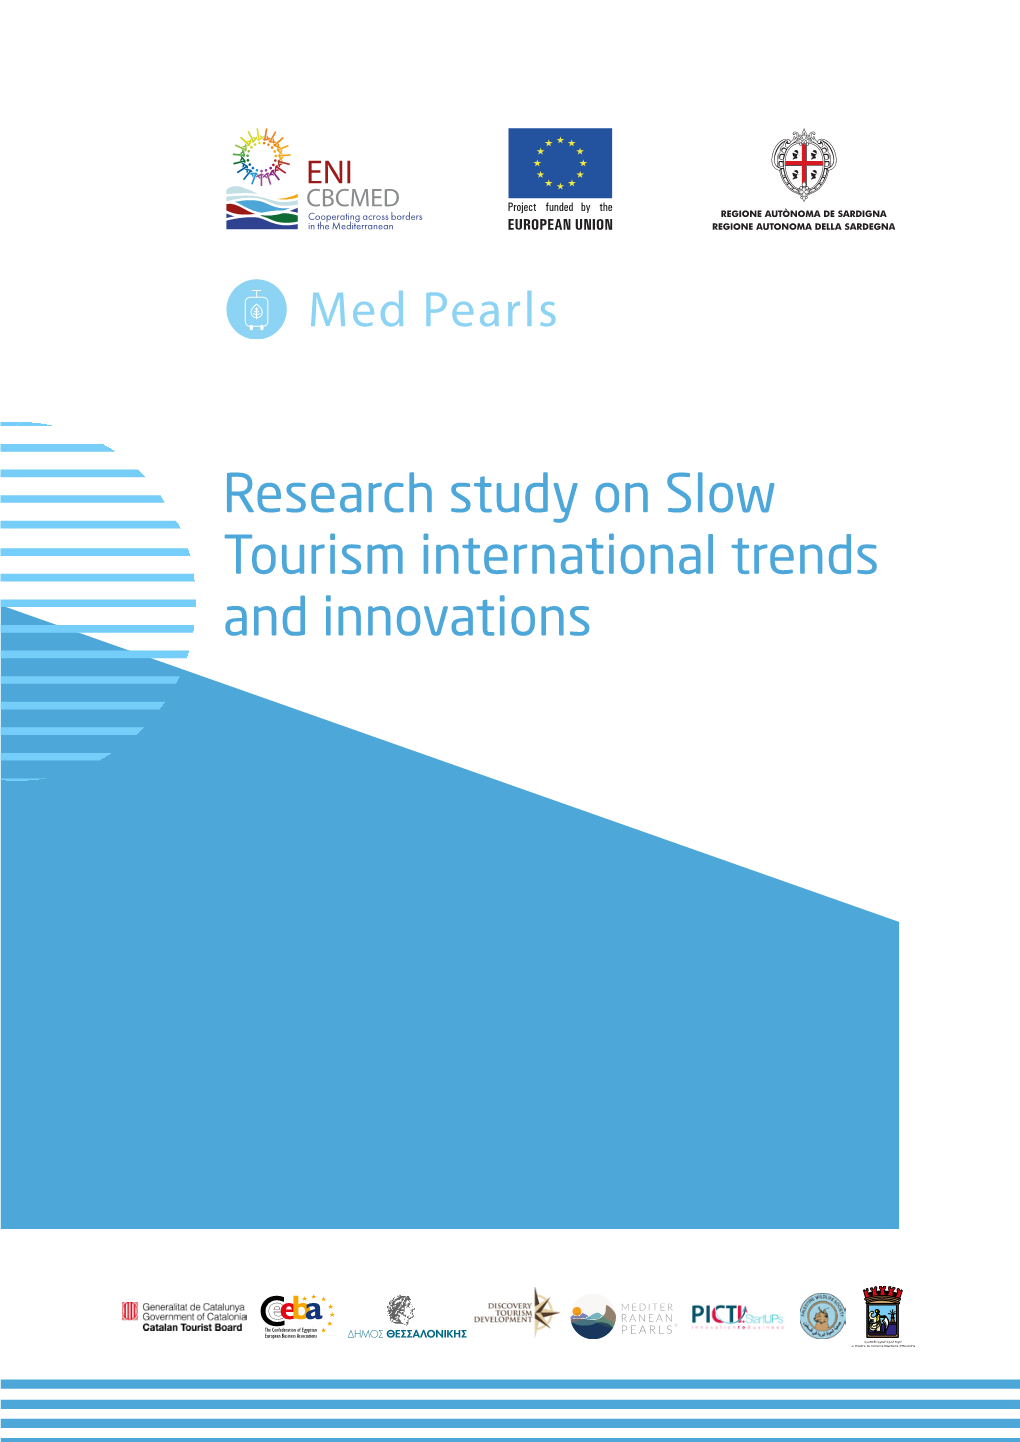 Research Study on Slow Tourism International Trends and Innovations CHAPTER 3: Market Research on Slow Tourism Demand